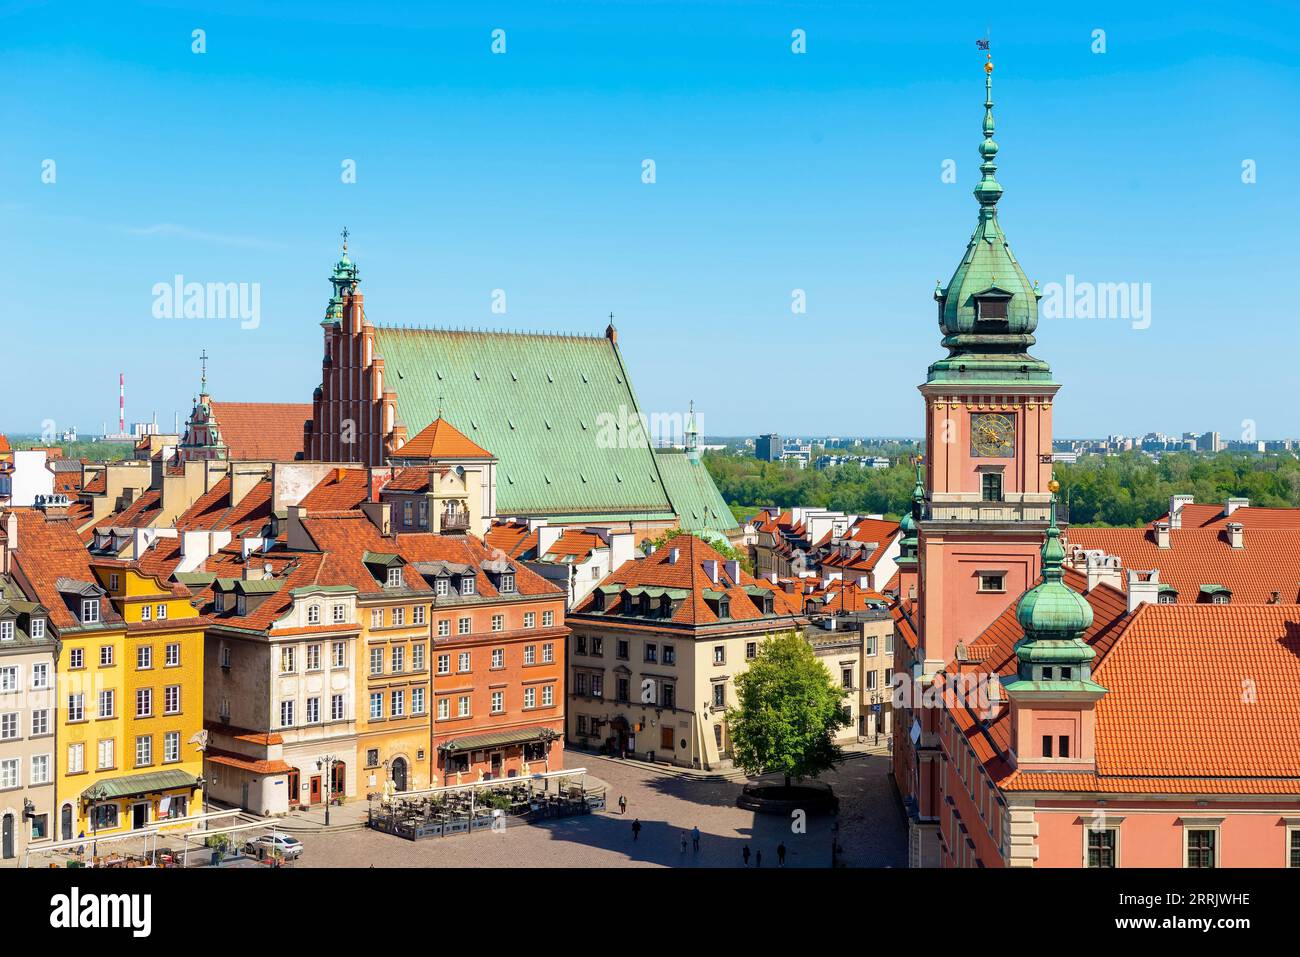 The Royal Castle of Warsaw is a castle residency that formerly served throughout the centuries as the official residence of the Polish monarchs. Stock Photo